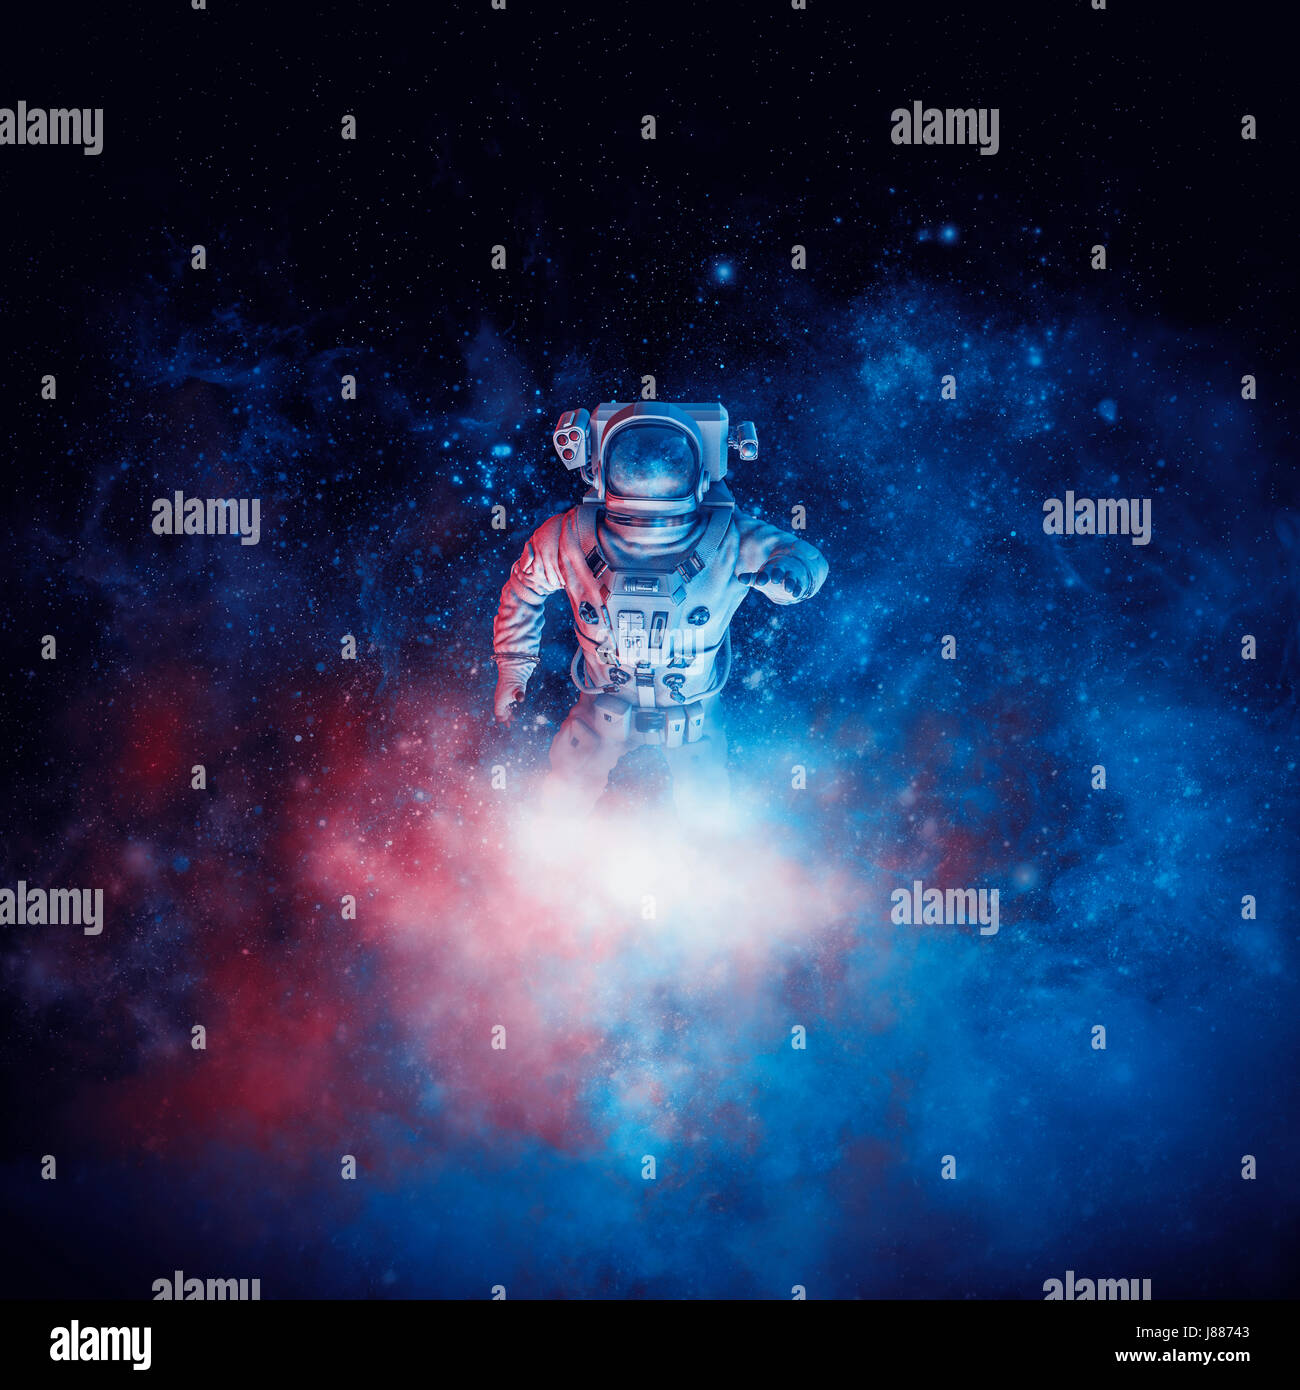 Galactic cloud astronaut / 3D illustration of astronaut among glowing space dust Stock Photo